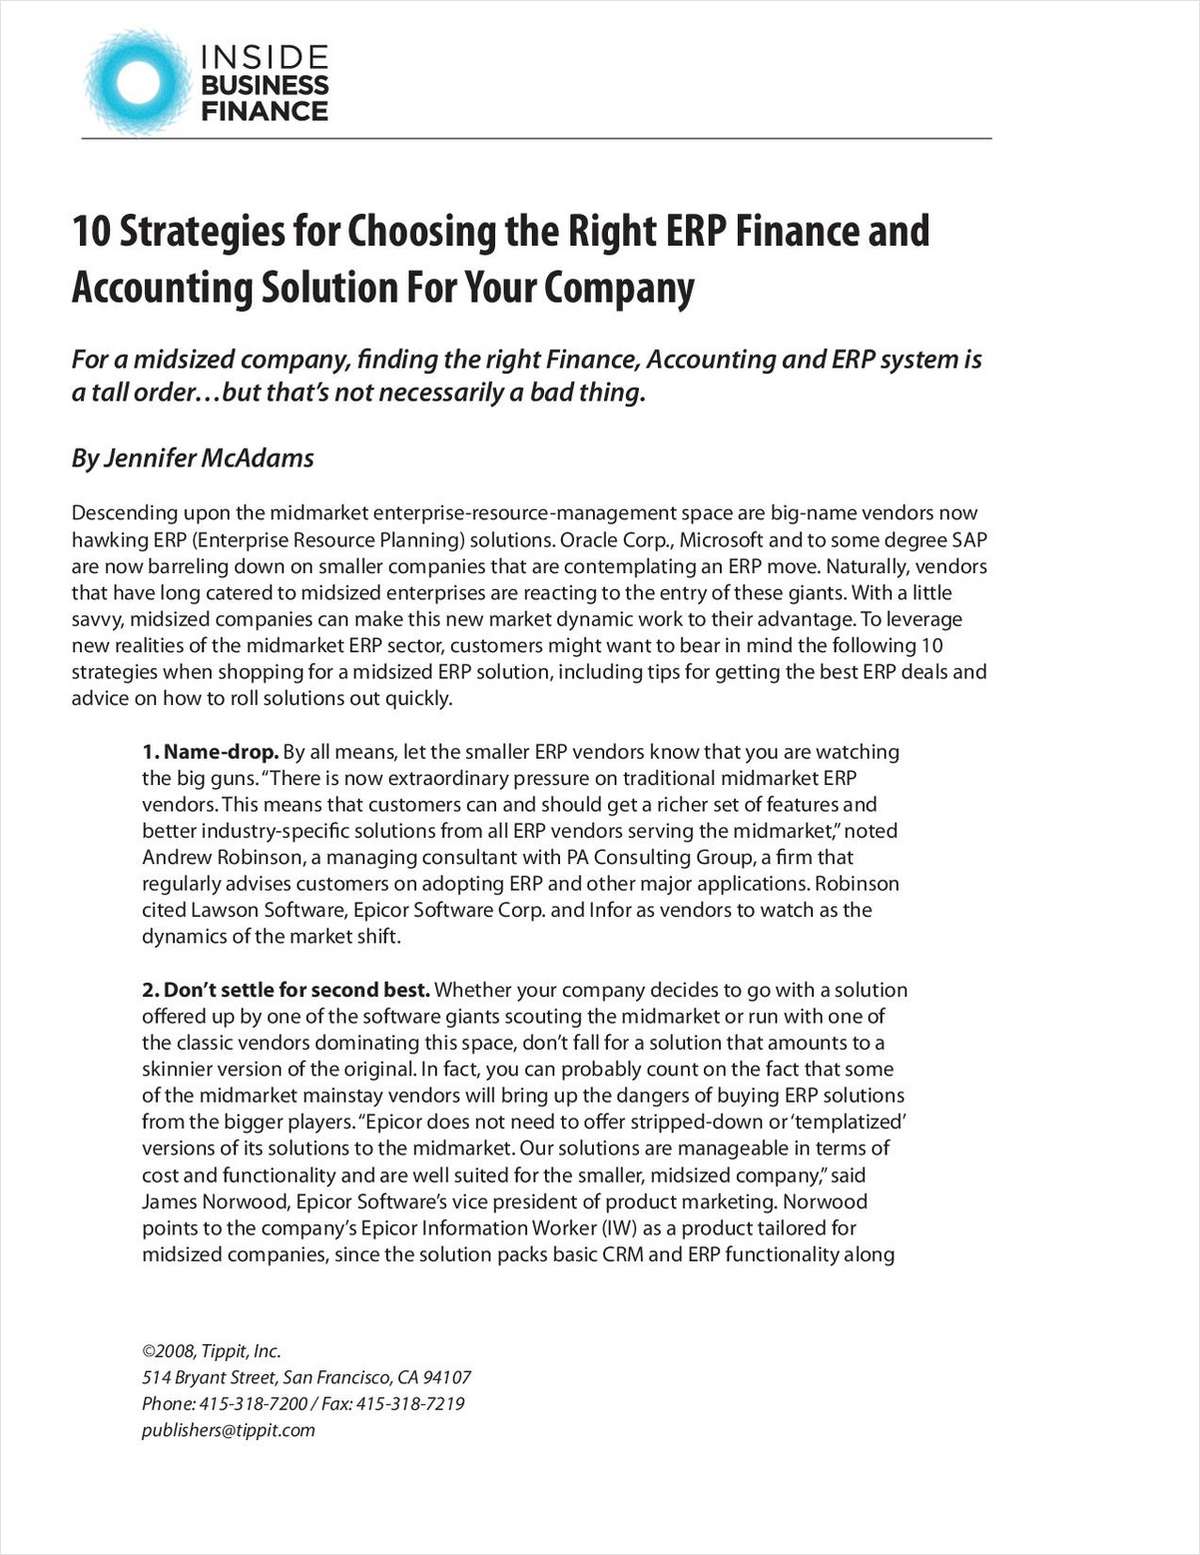 10 Strategies for Choosing the Right ERP Finance and Accounting Solution For Your Company